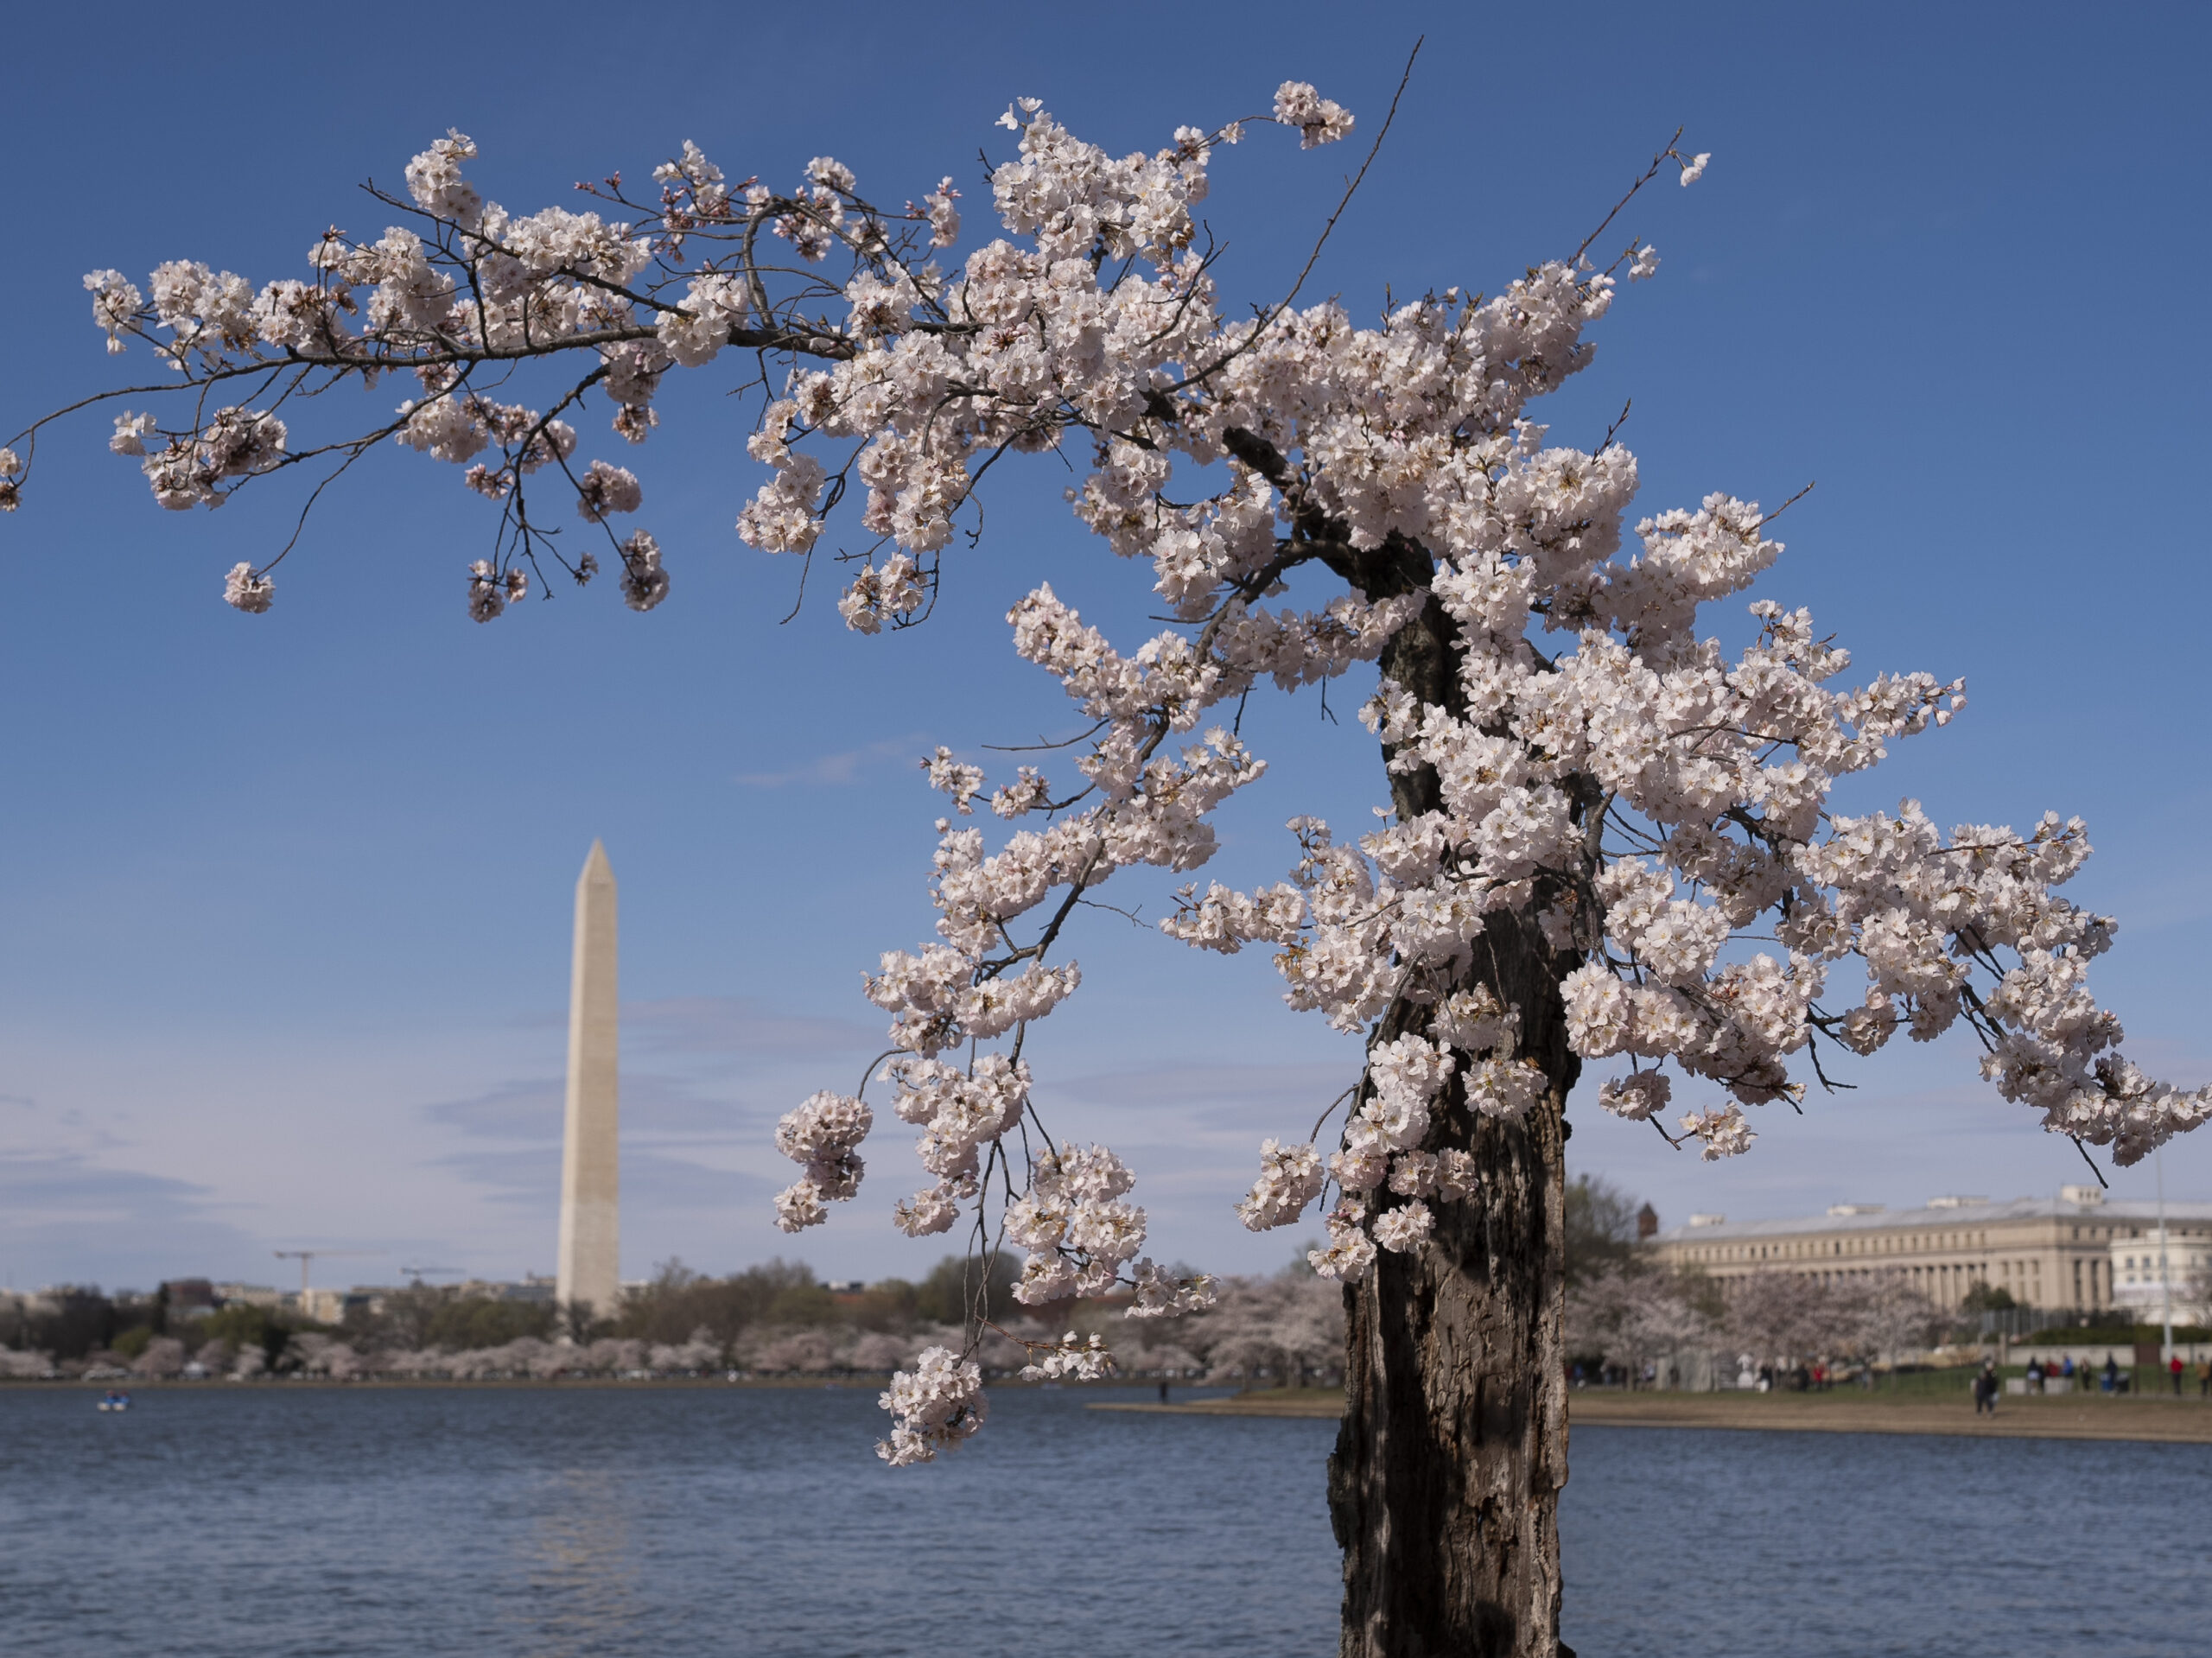 Japan will give new cherry trees to replace those lost in D.C. construction